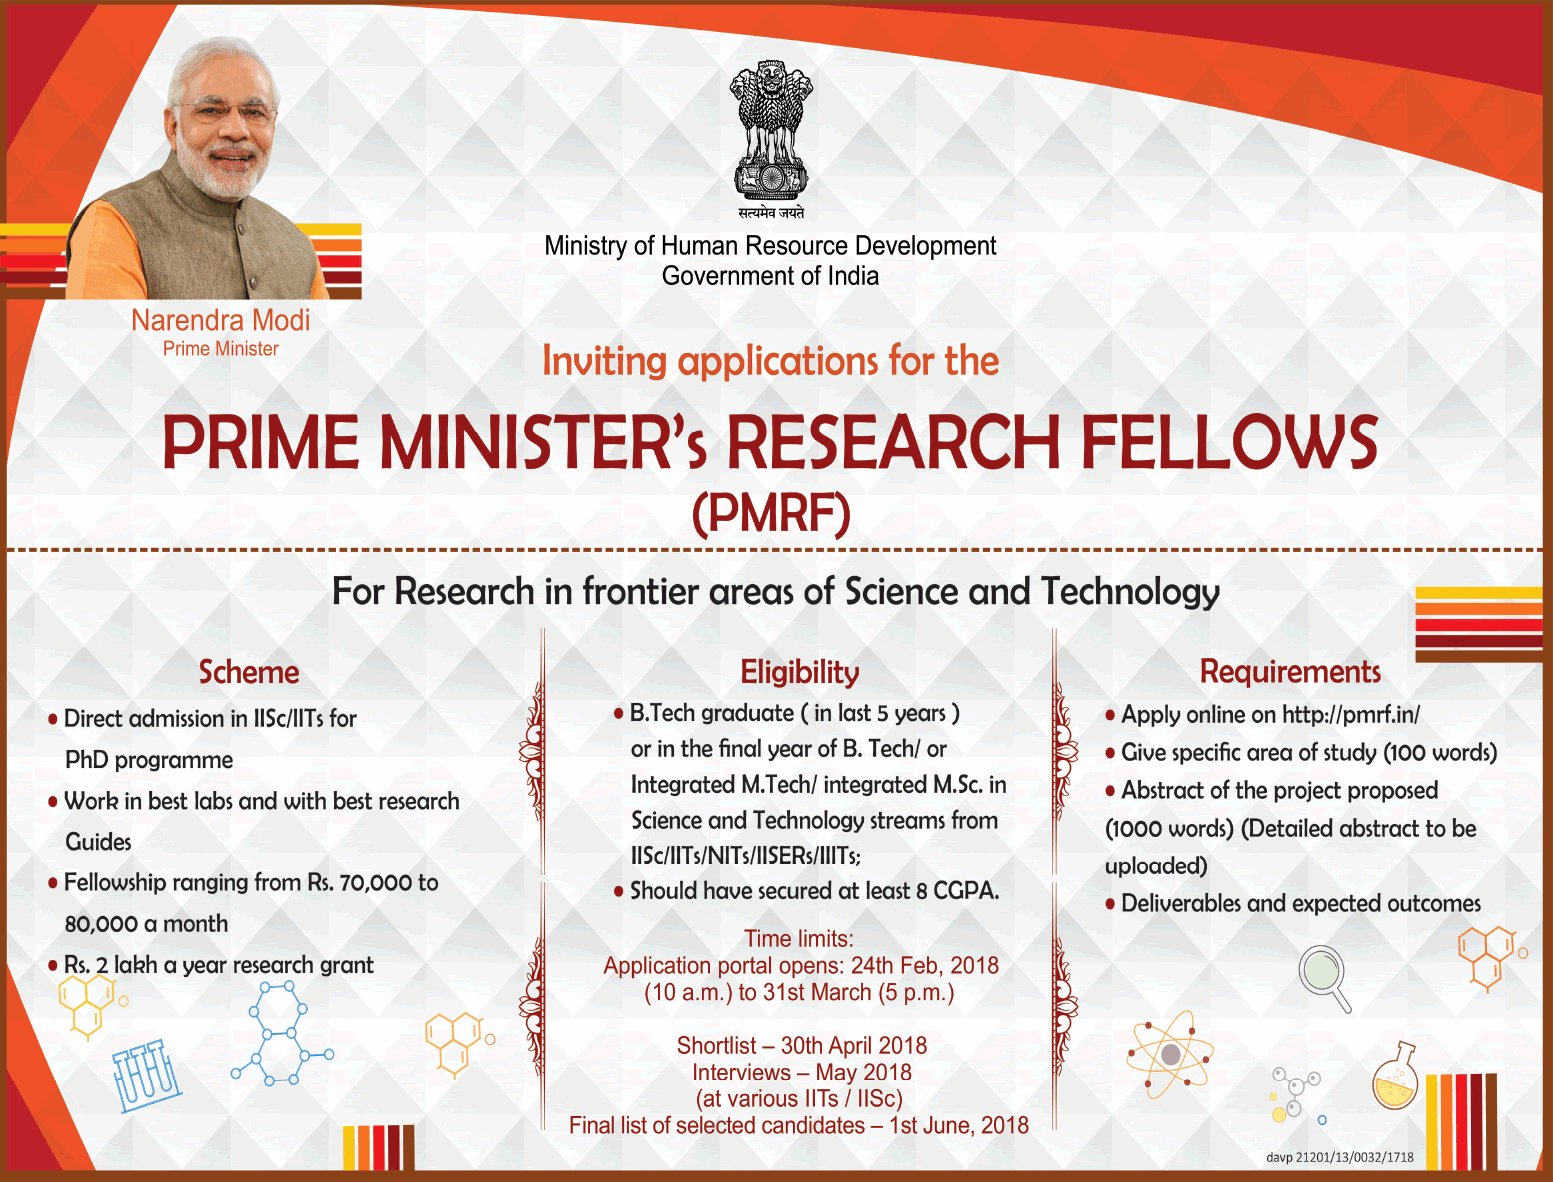 By Sidestepping Reservations, the Prime Minister's Research Fellowship May  Be Unconstitutional